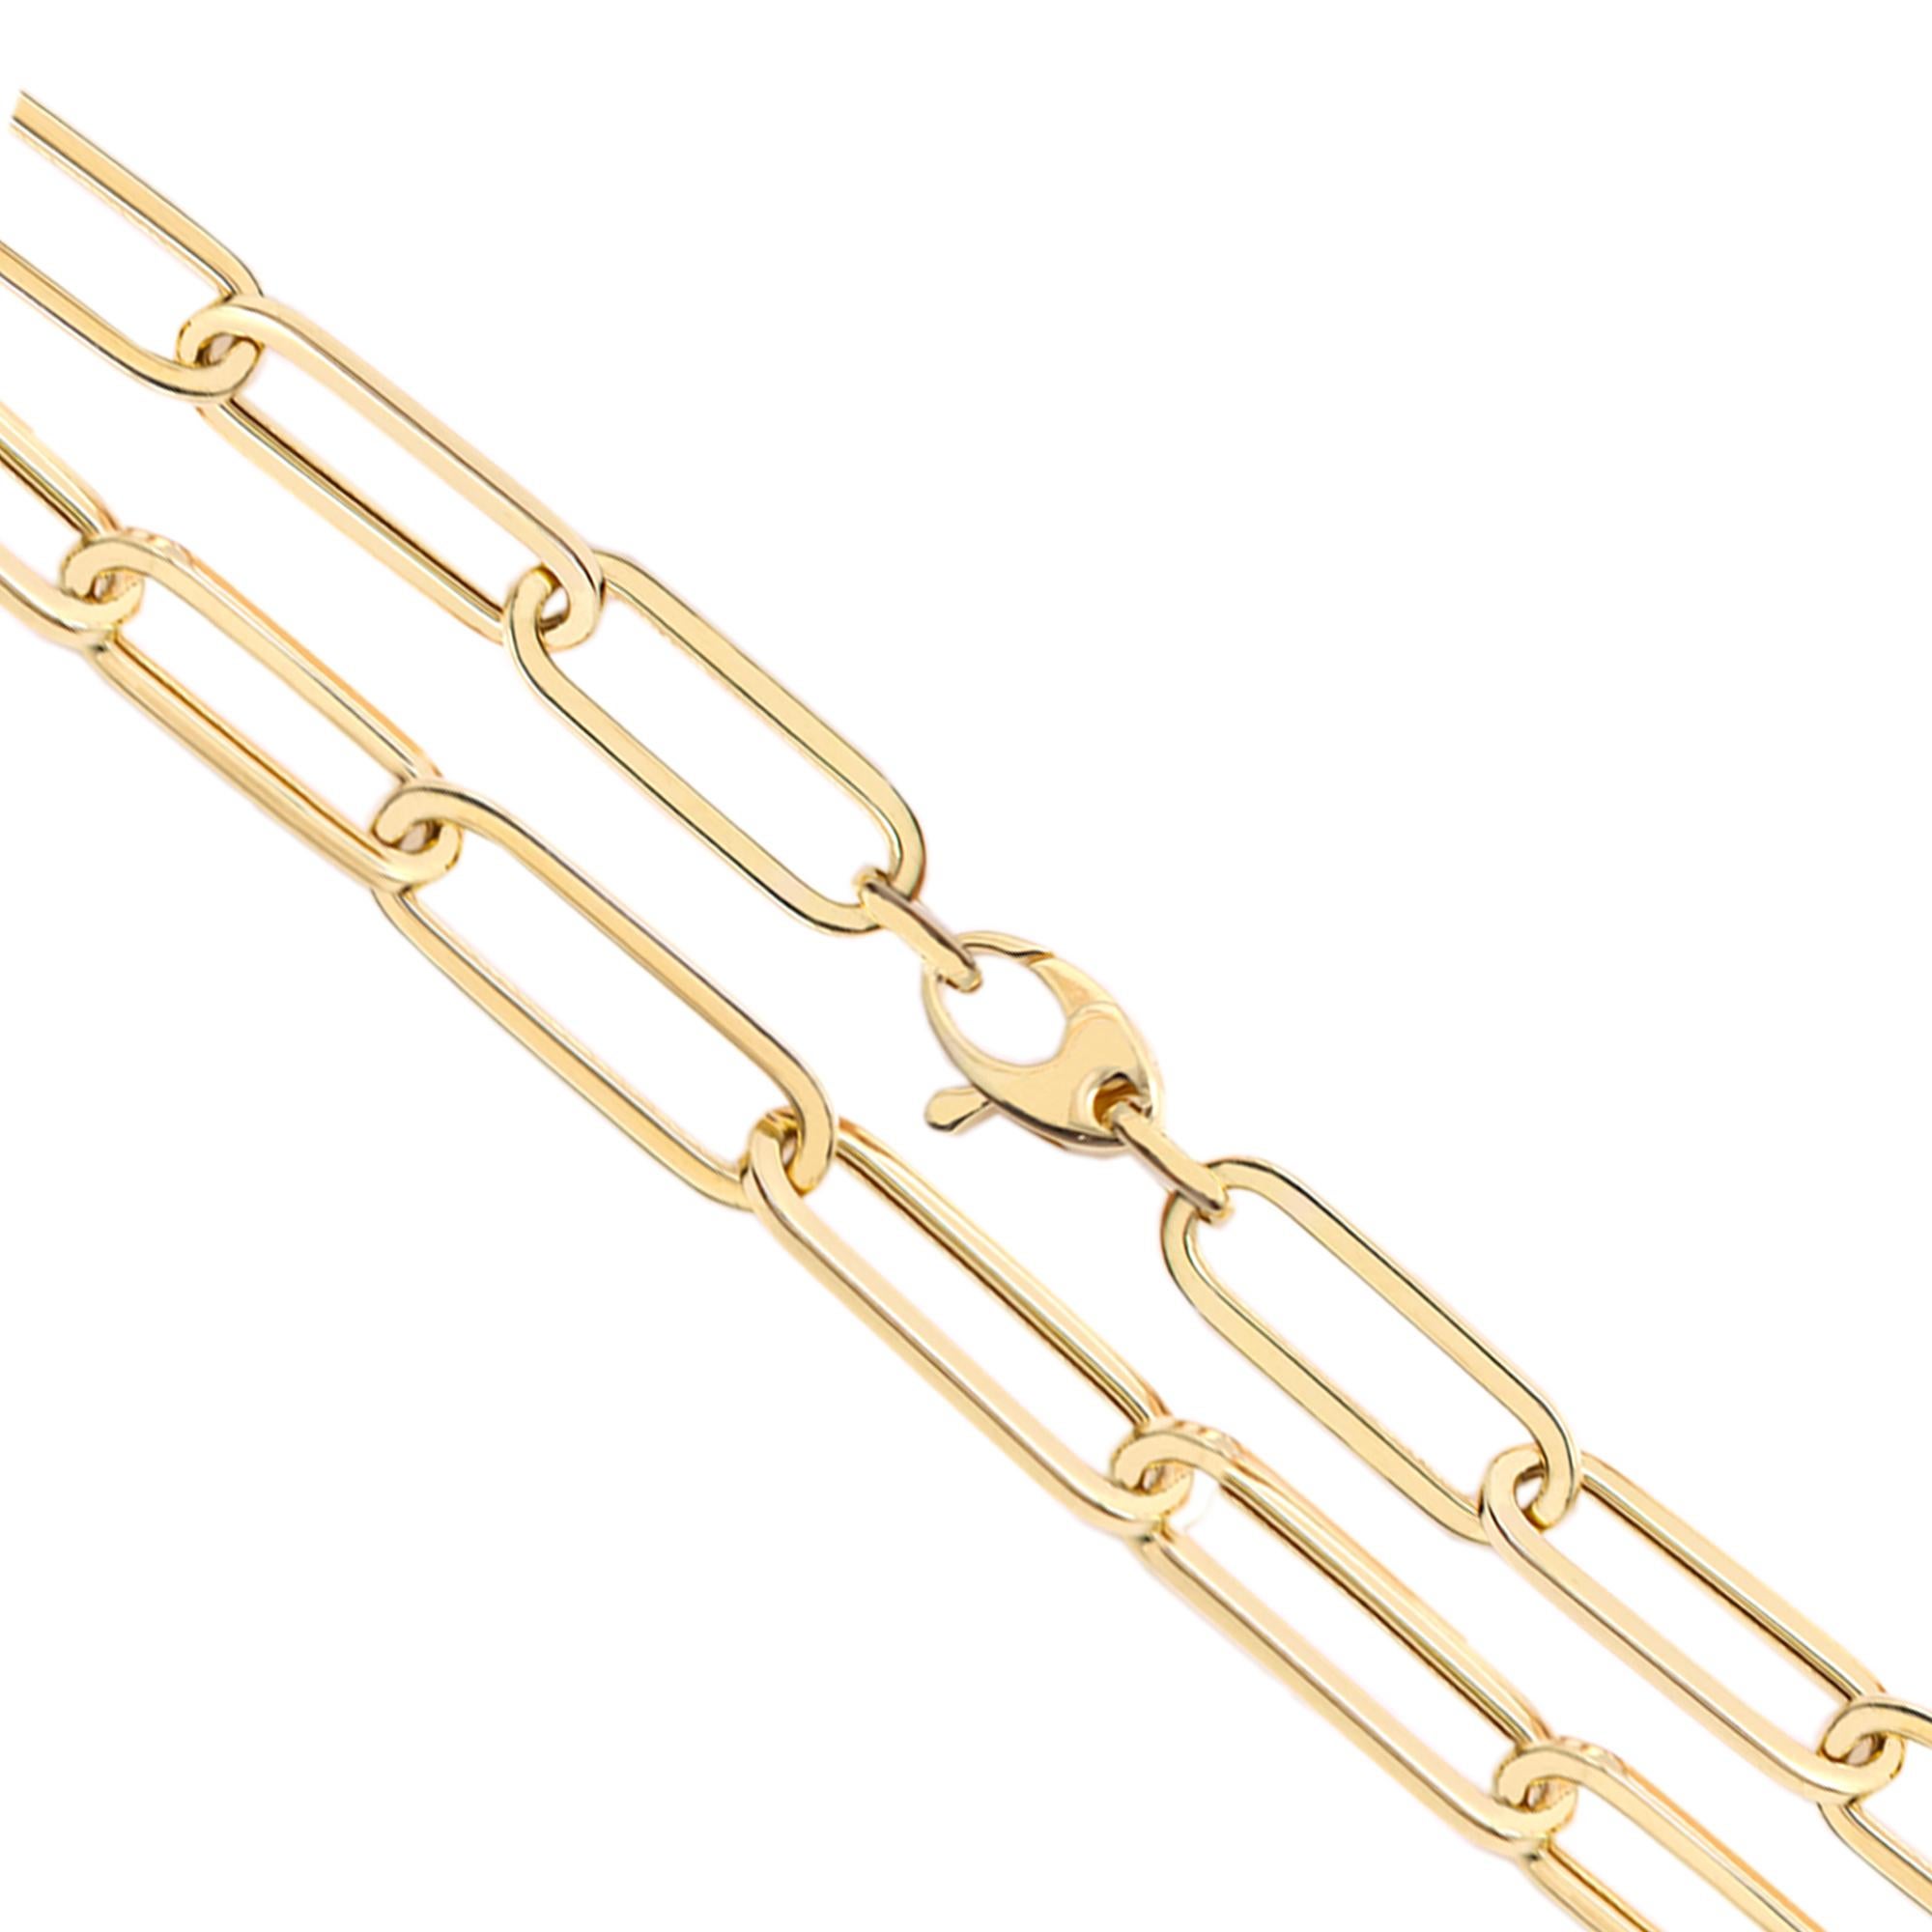 Very Trendy Link Chain called PaperClip Link Chain
This Particular is one of the most thickest it is referred as 8mm thick (according to its link width).
Made In Italy - Solid 14k Yellow Gold  18.2 grams
Chain Length is 19' Inch
The width of the